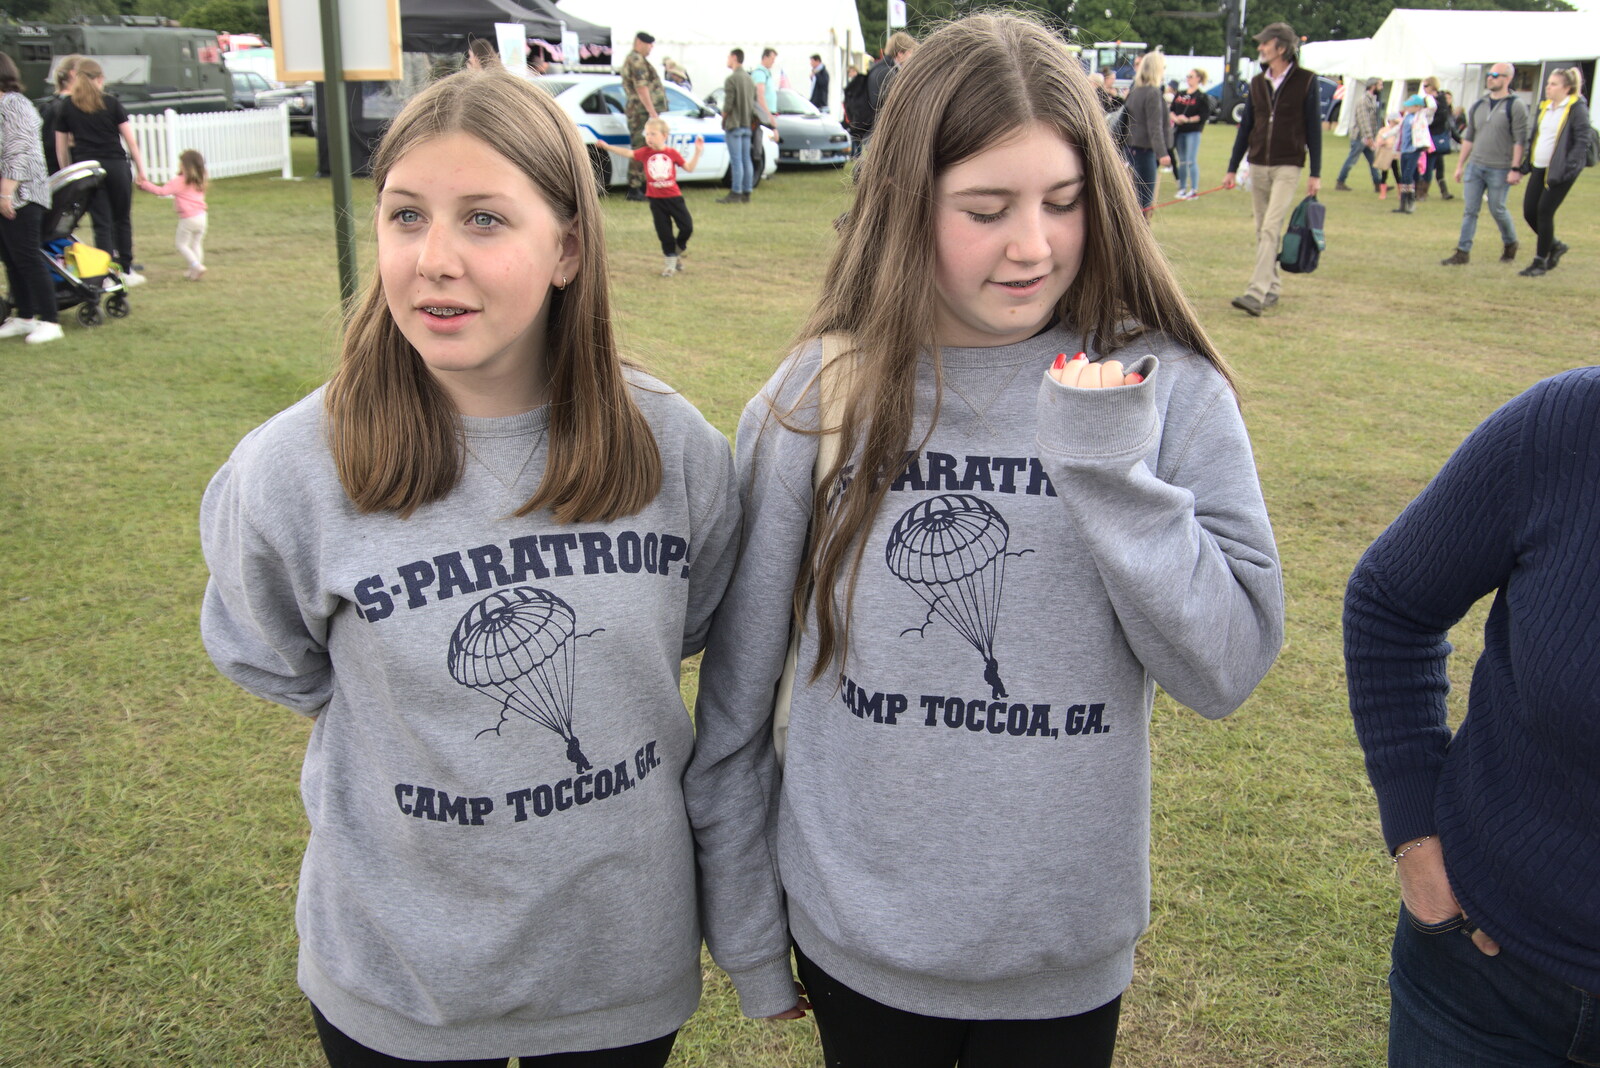 The Suffolk Show, Trinity Park, Ipswich - 1st June 2022: Soph and Amelia look like sisters